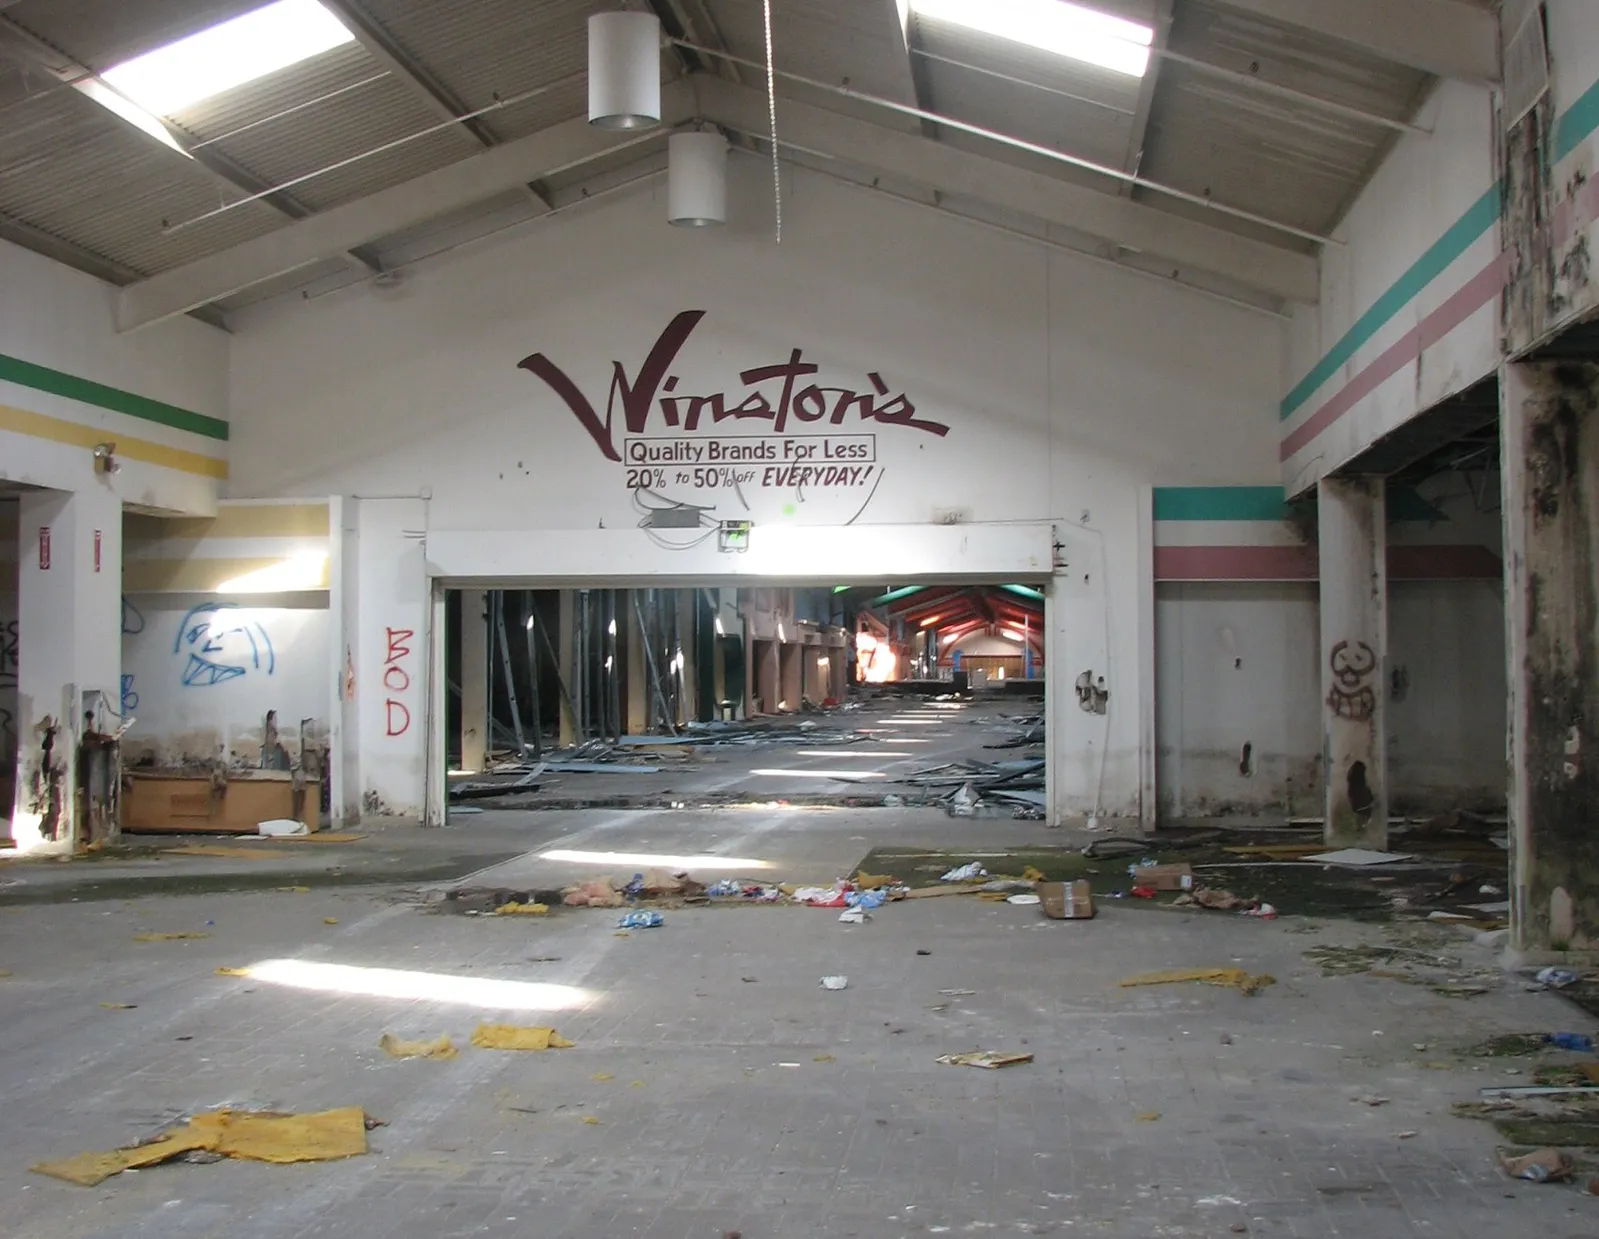 Part 1: The Fall of America's Malls